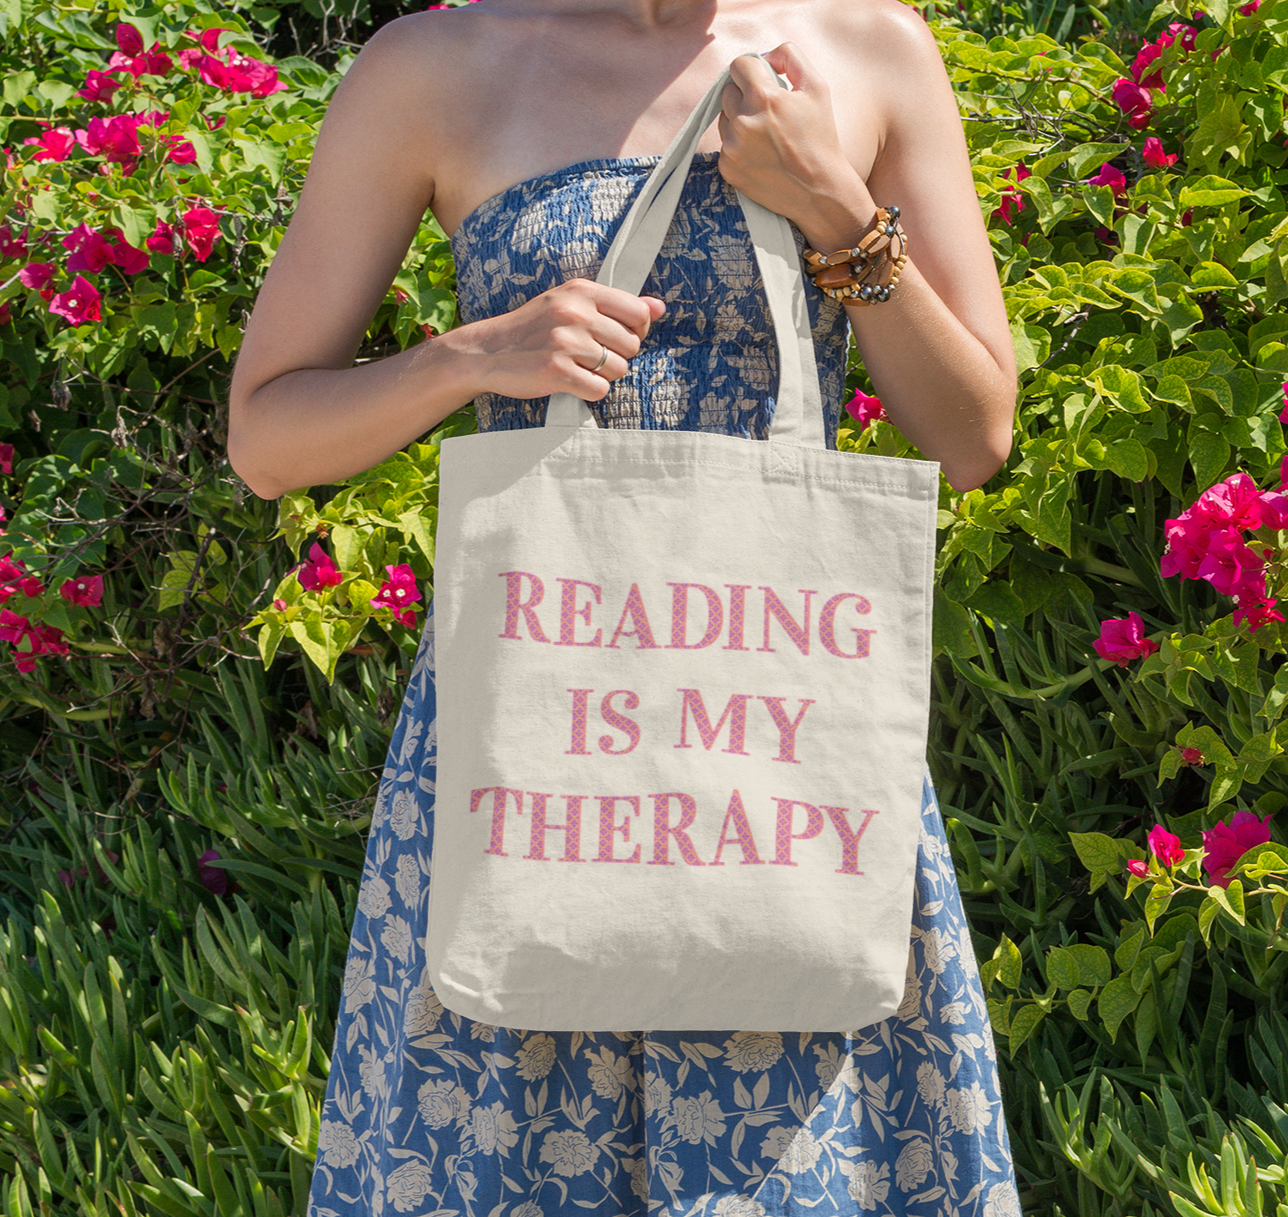 Reading Is My Therapy wording on canvas tote bag.